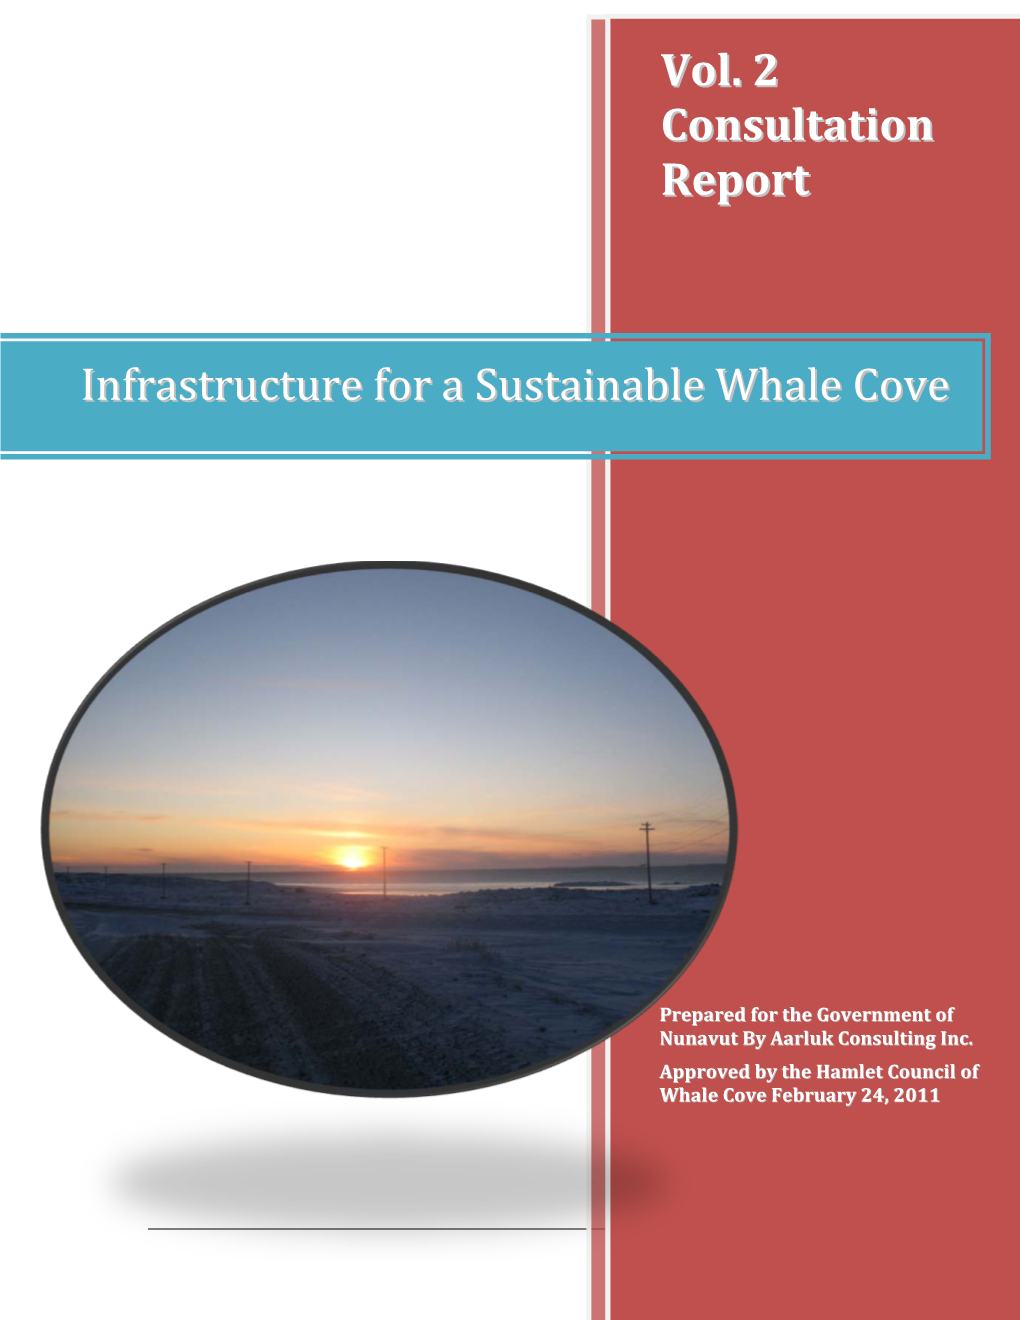 Infrastructure for a Sustainable Whale Cove Vol. 2 Consultation Report